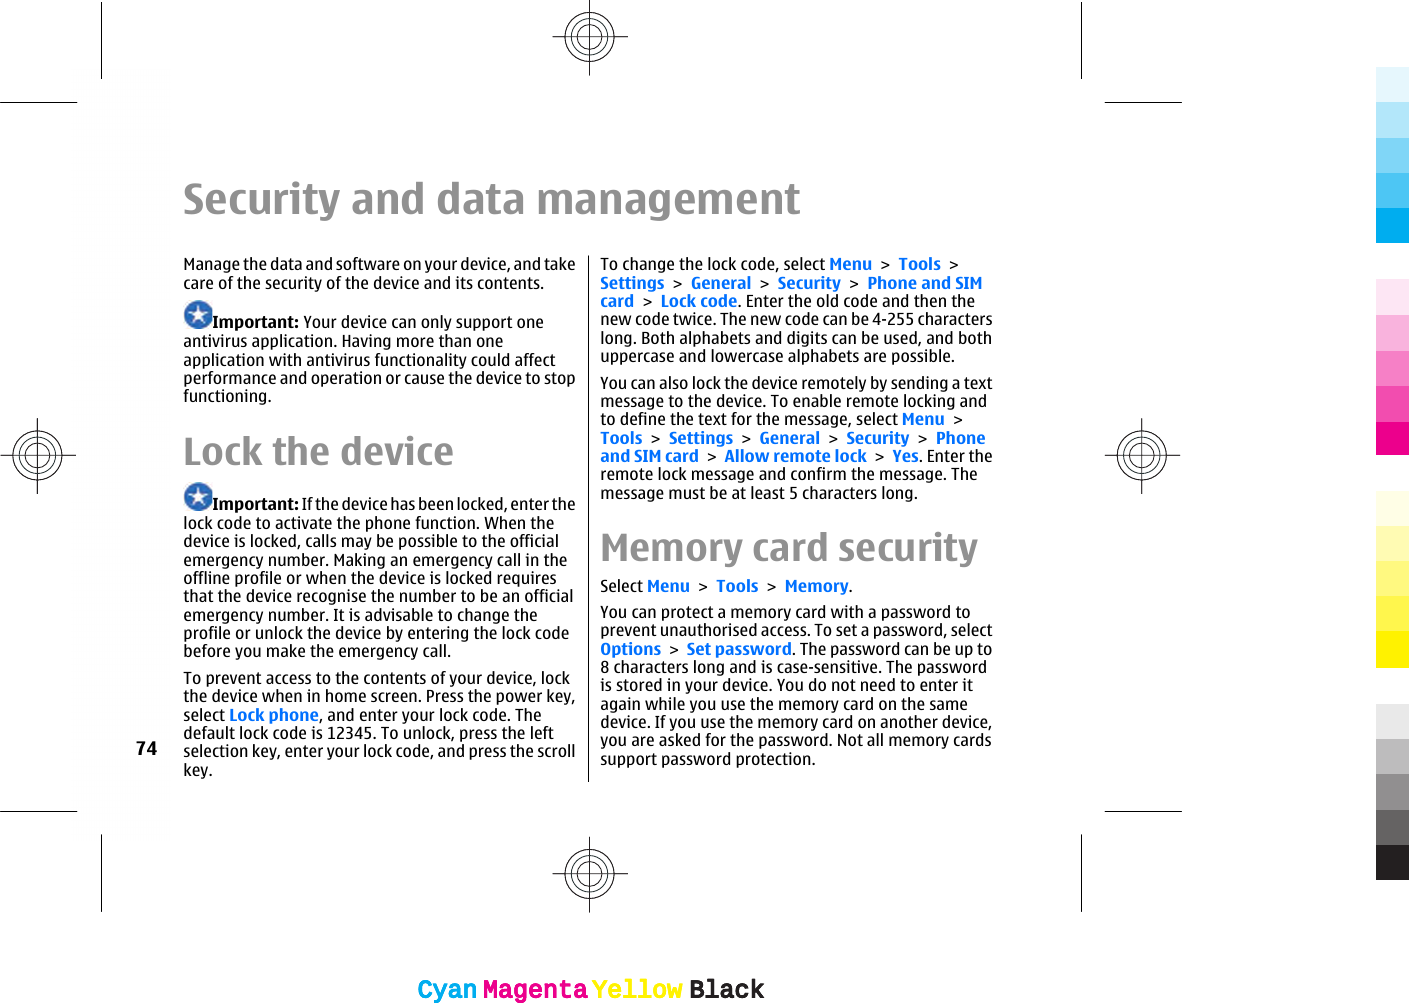 Security and data managementManage the data and software on your device, and takecare of the security of the device and its contents.Important: Your device can only support oneantivirus application. Having more than oneapplication with antivirus functionality could affectperformance and operation or cause the device to stopfunctioning.Lock the deviceImportant: If the device has been locked, enter thelock code to activate the phone function. When thedevice is locked, calls may be possible to the officialemergency number. Making an emergency call in theoffline profile or when the device is locked requiresthat the device recognise the number to be an officialemergency number. It is advisable to change theprofile or unlock the device by entering the lock codebefore you make the emergency call.To prevent access to the contents of your device, lockthe device when in home screen. Press the power key,select Lock phone, and enter your lock code. Thedefault lock code is 12345. To unlock, press the leftselection key, enter your lock code, and press the scrollkey.To change the lock code, select Menu &gt; Tools &gt;Settings &gt; General &gt; Security &gt; Phone and SIMcard &gt; Lock code. Enter the old code and then thenew code twice. The new code can be 4-255 characterslong. Both alphabets and digits can be used, and bothuppercase and lowercase alphabets are possible.You can also lock the device remotely by sending a textmessage to the device. To enable remote locking andto define the text for the message, select Menu &gt;Tools &gt; Settings &gt; General &gt; Security &gt; Phoneand SIM card &gt; Allow remote lock &gt; Yes. Enter theremote lock message and confirm the message. Themessage must be at least 5 characters long.Memory card securitySelect Menu &gt; Tools &gt; Memory.You can protect a memory card with a password toprevent unauthorised access. To set a password, selectOptions &gt; Set password. The password can be up to8 characters long and is case-sensitive. The passwordis stored in your device. You do not need to enter itagain while you use the memory card on the samedevice. If you use the memory card on another device,you are asked for the password. Not all memory cardssupport password protection.74CyanCyanMagentaMagentaYellowYellowBlackBlackCyanCyanMagentaMagentaYellowYellowBlackBlack